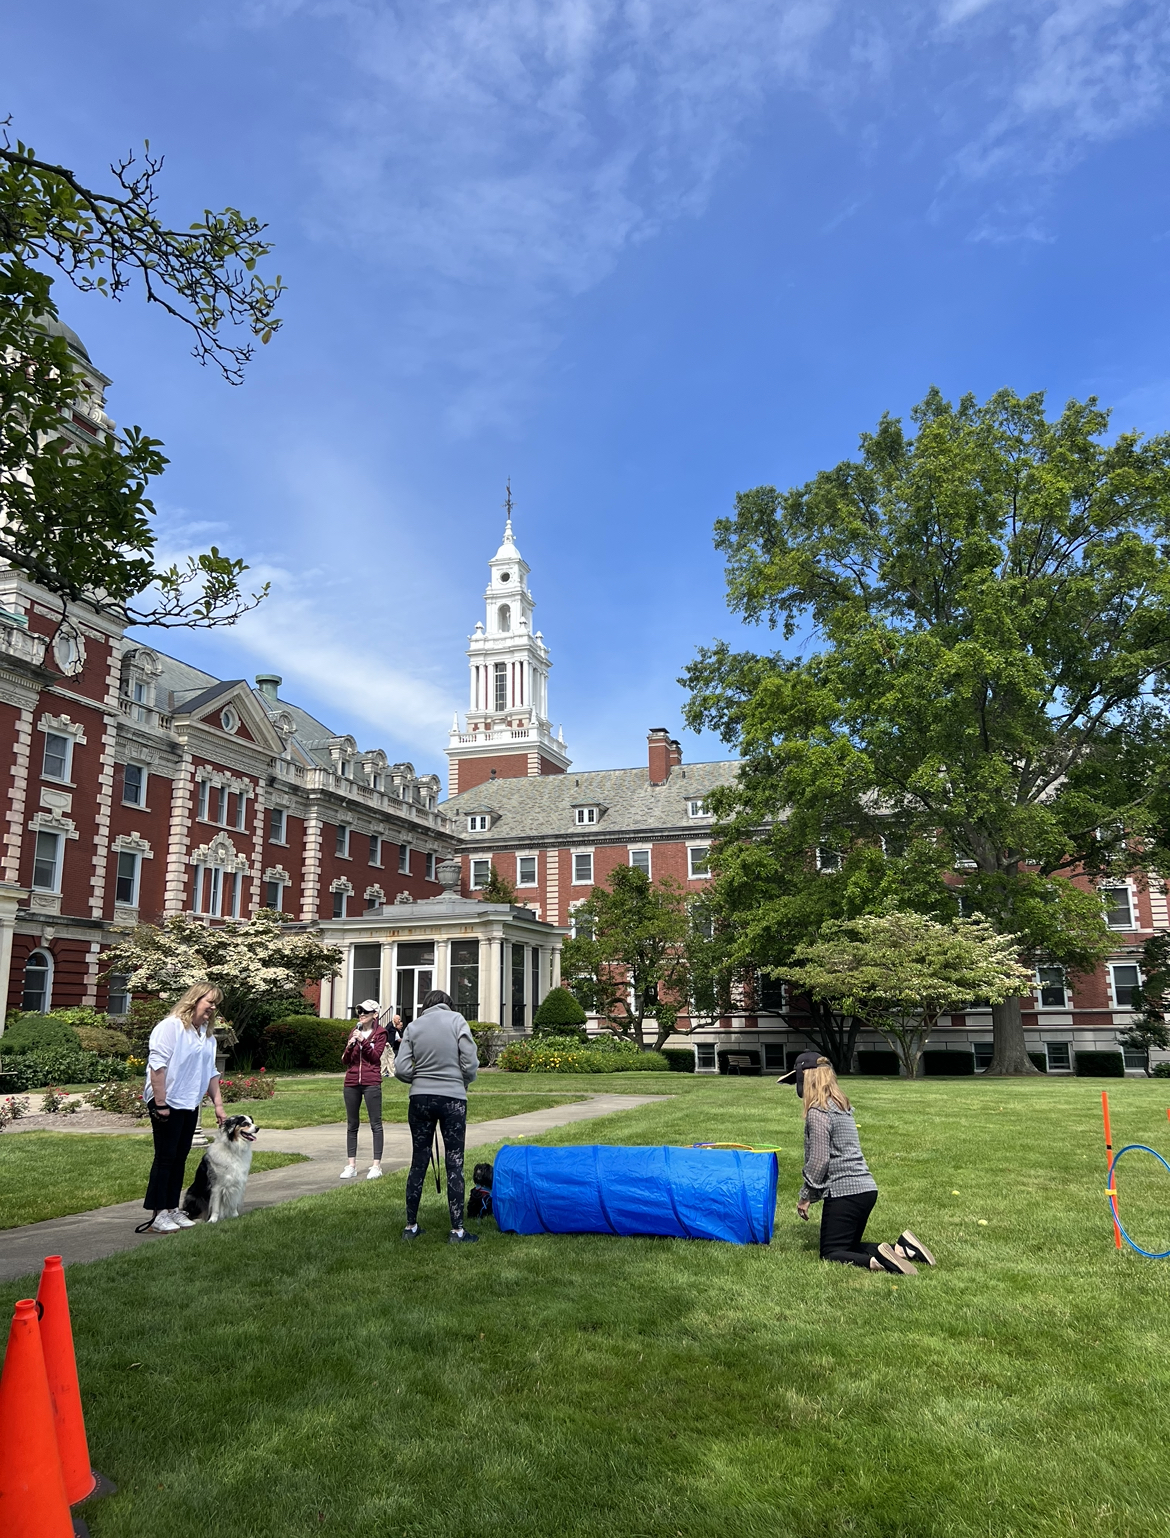 The dog obstacle course on Osborn South Lawn.